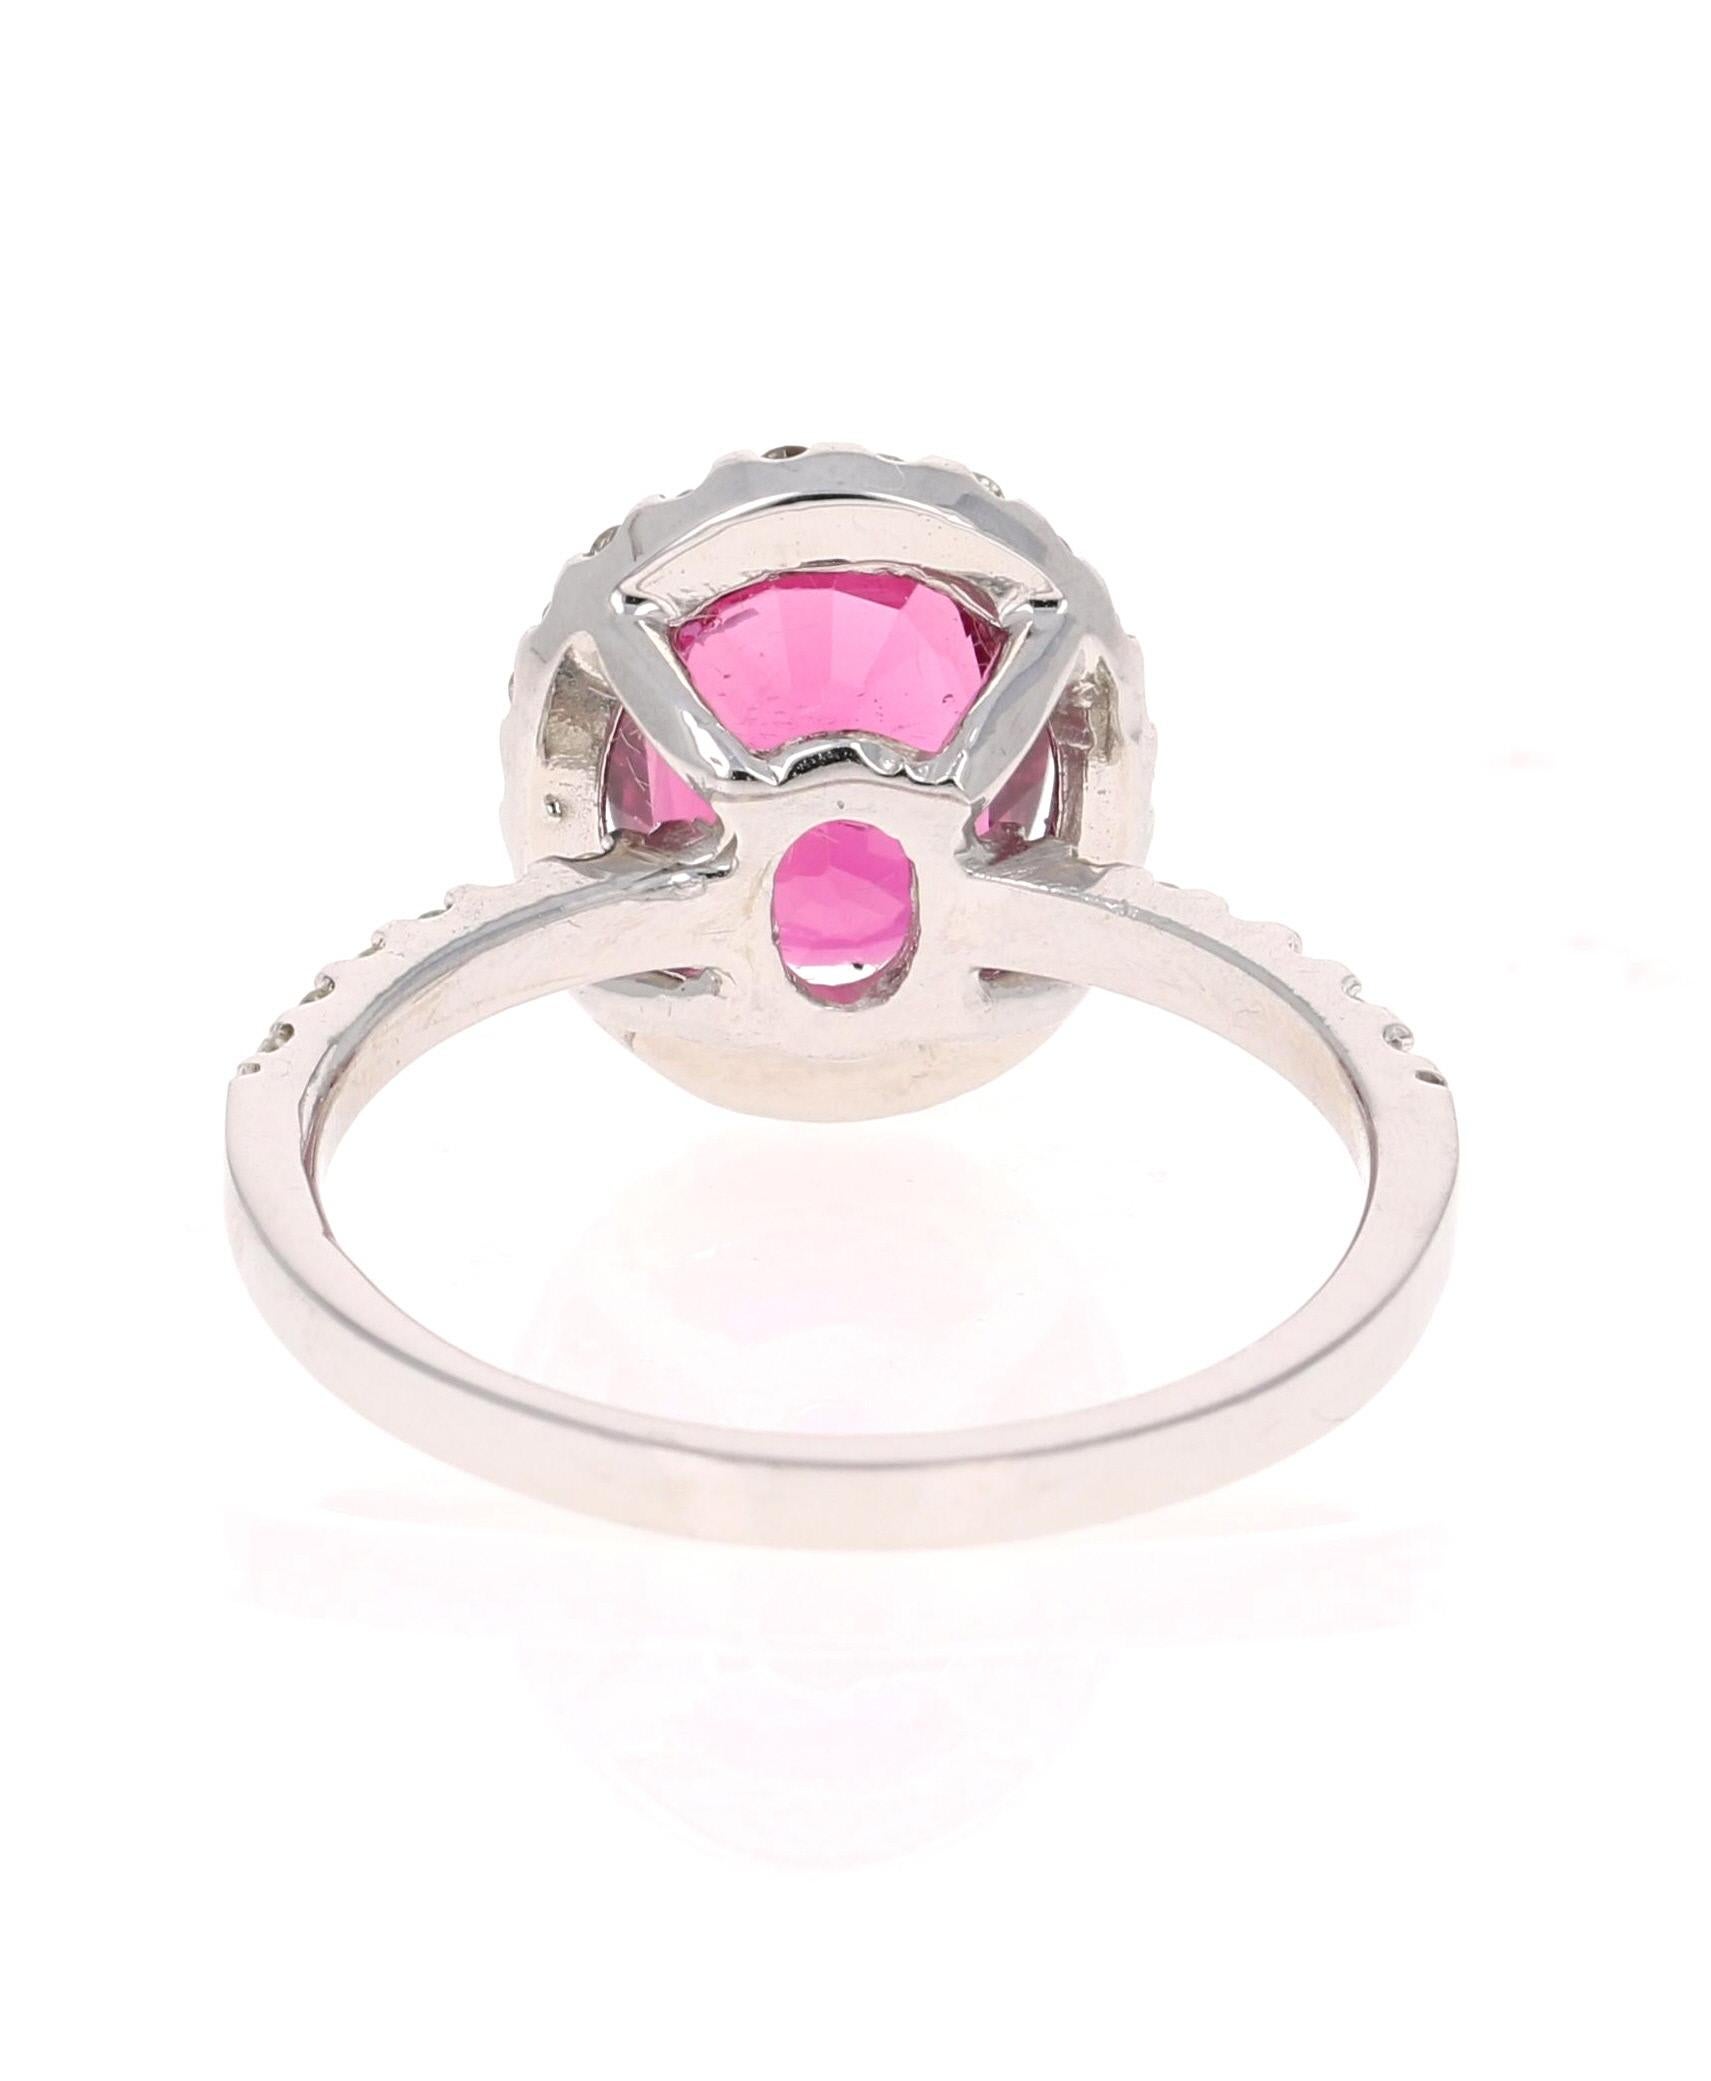 Contemporary 3.09 Carat Pink Tourmaline Diamond White Gold Ring For Sale